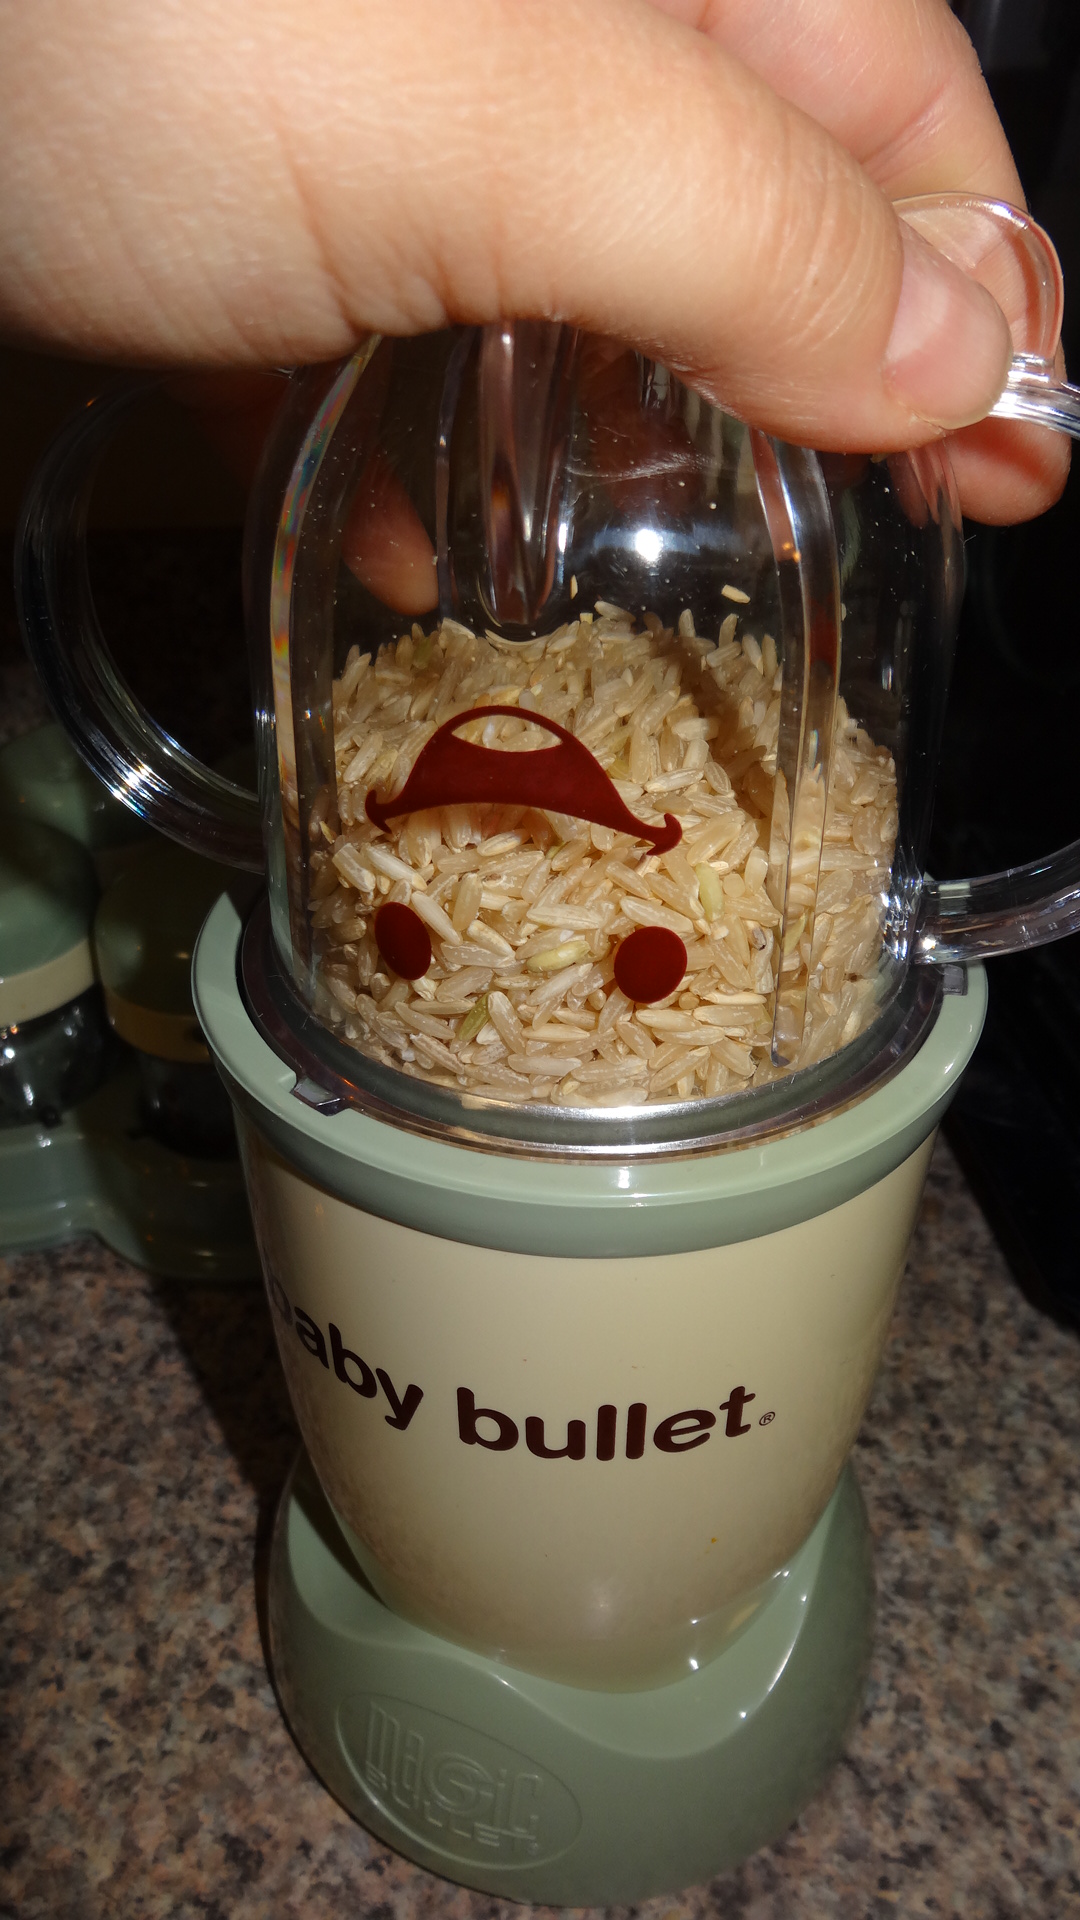 Baby Bullet Review – JUST A MOM MINUTE